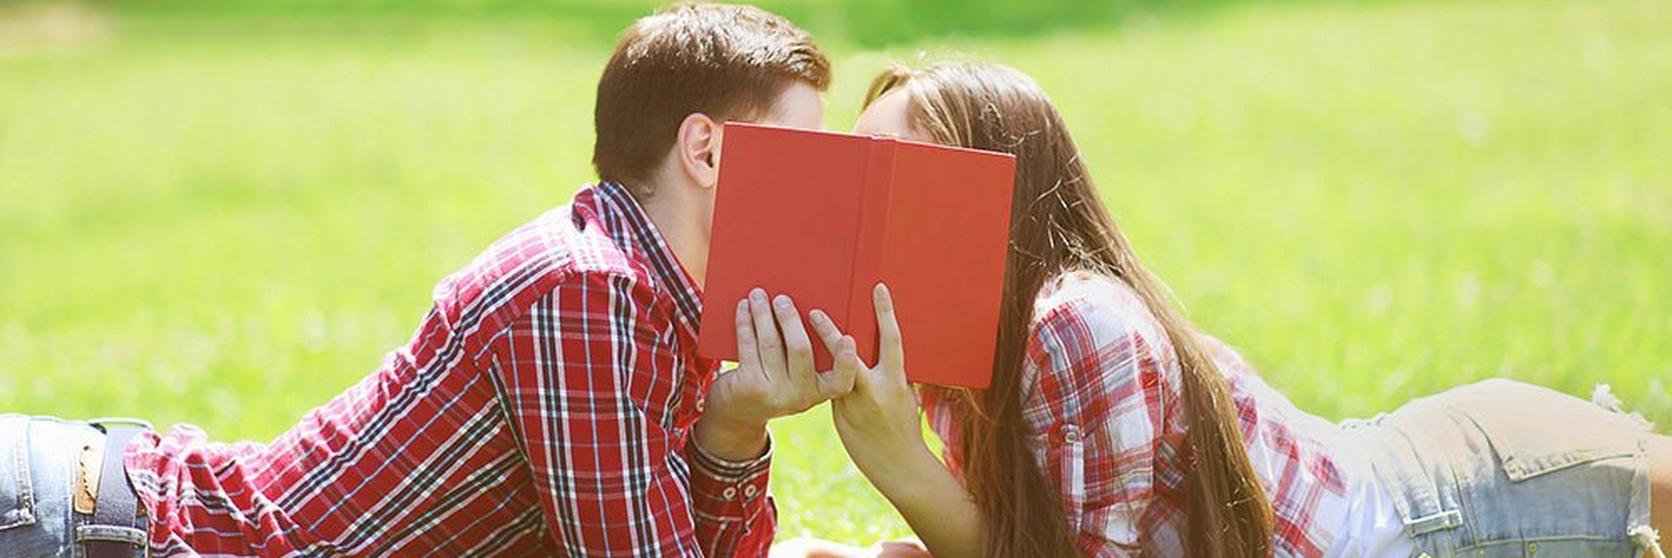 couple-reading-book-outdoors